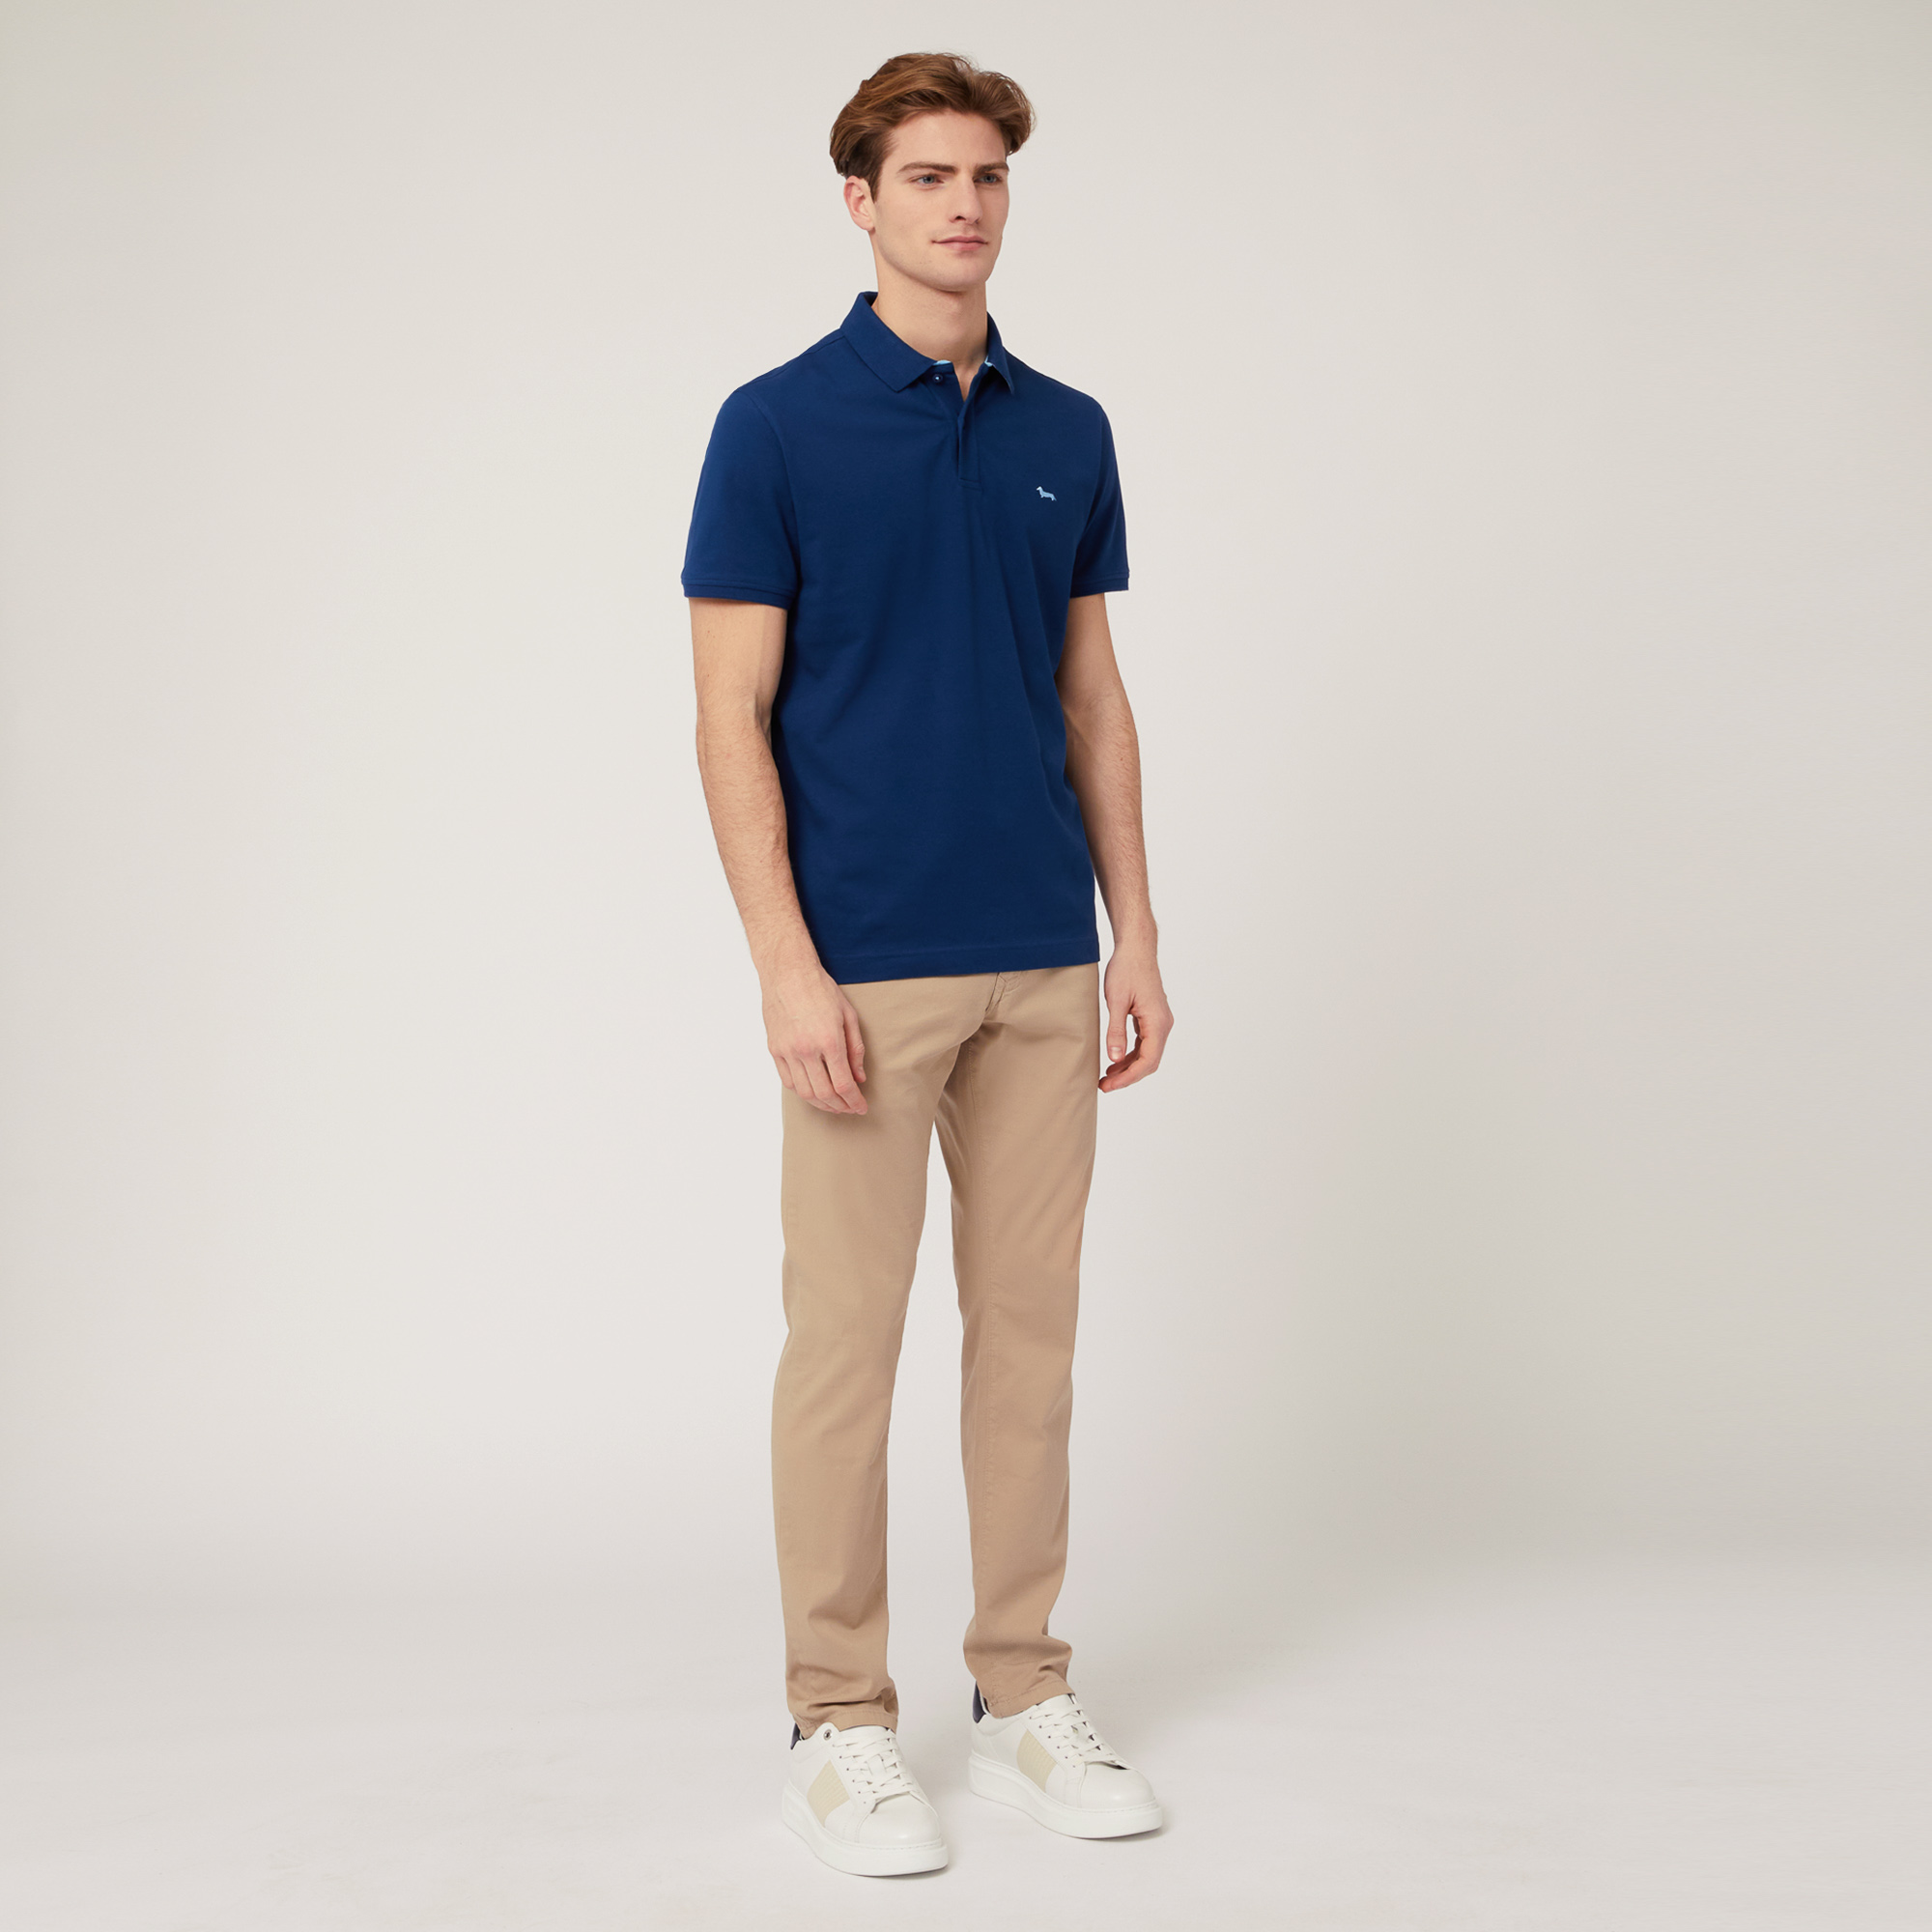 Ribbed Polo with Collar, Light Blue, large image number 3